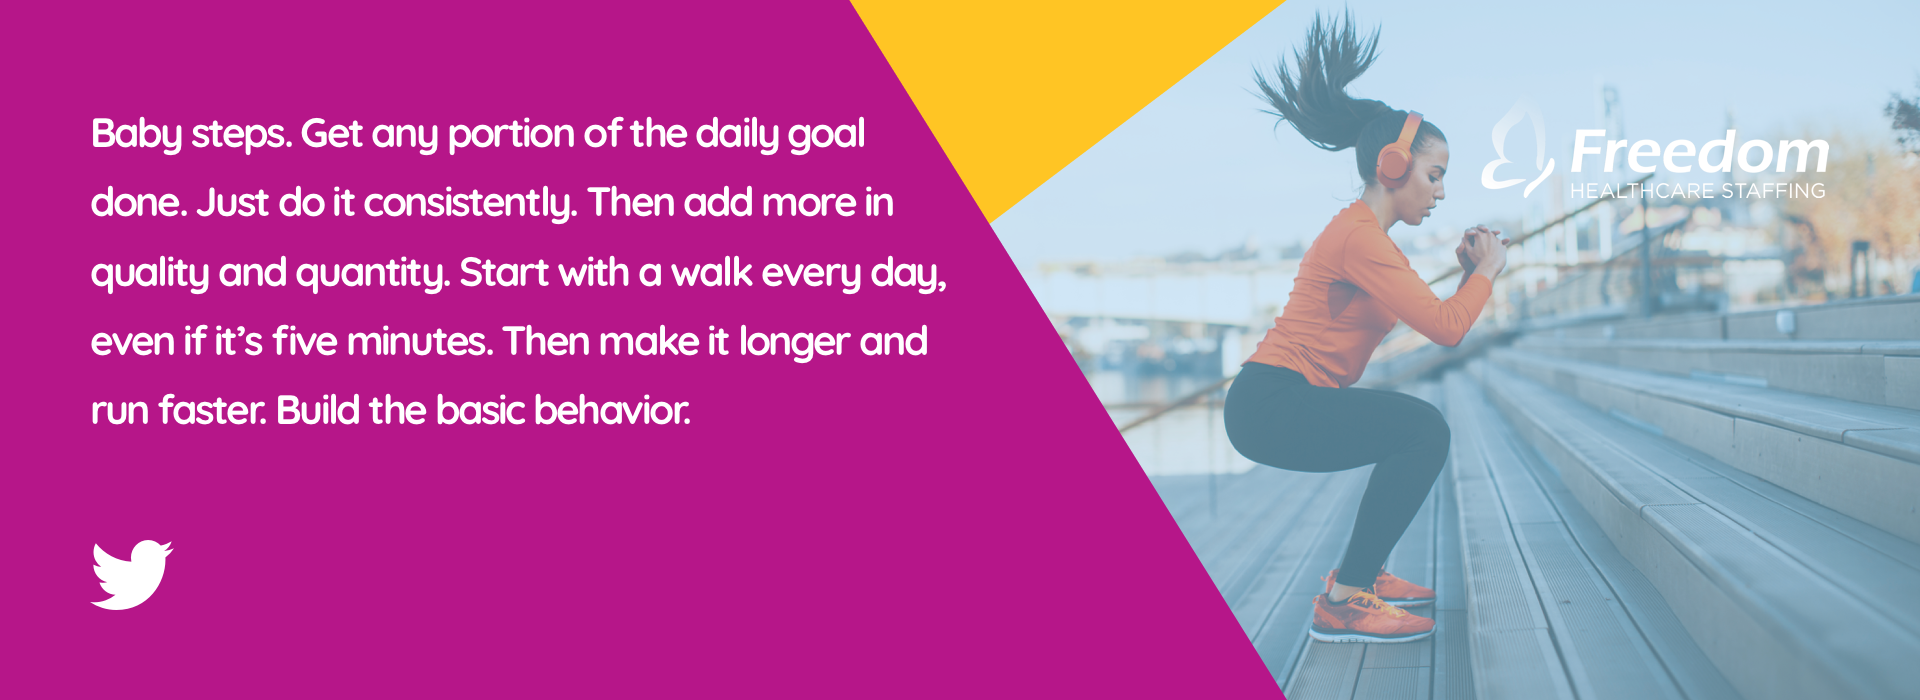 Baby steps. Get any portion of the daily goal done. Just do it consistently. Then add more in quality and quantity. Start with a walk every day, even if it’s five minutes. Then make it longer and run faster. Build the basic behavior.